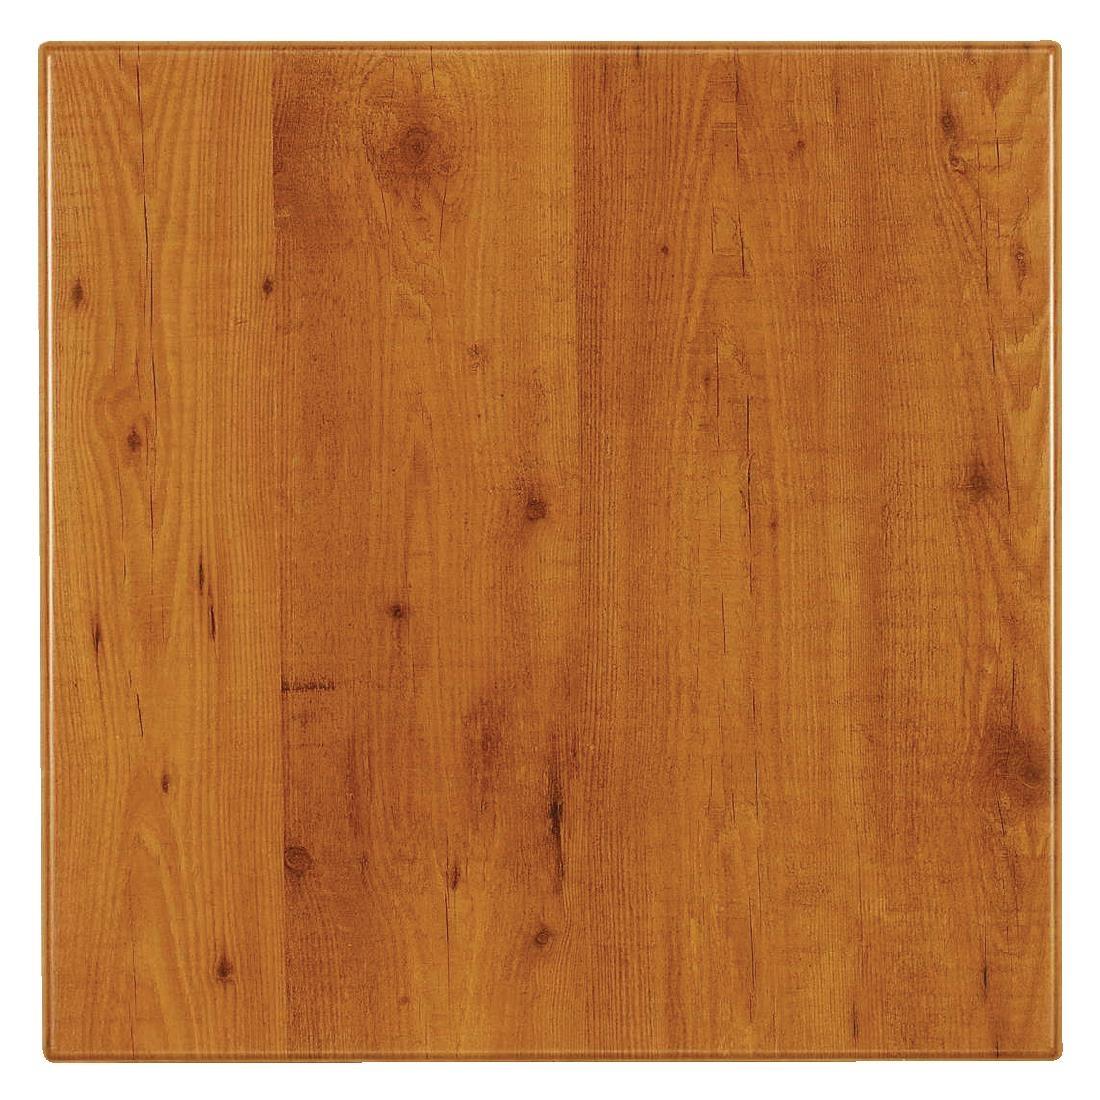 Werzalit Pre-drilled Square Table Top  Pine 700mm - CG713  - 1